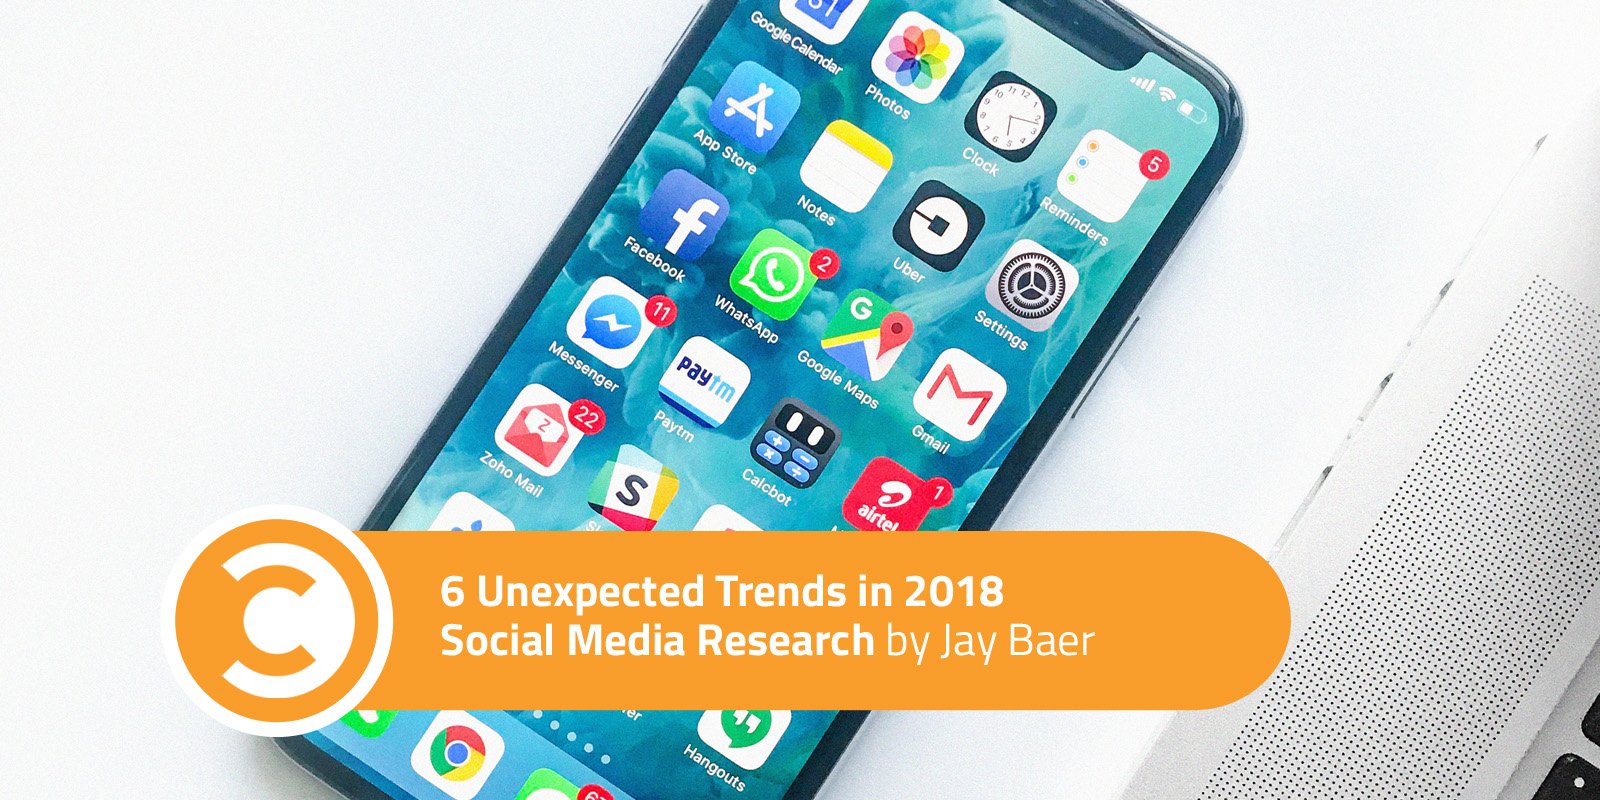 6-Unexpected-Trends-in-2018-Social-Media-Research.jpg